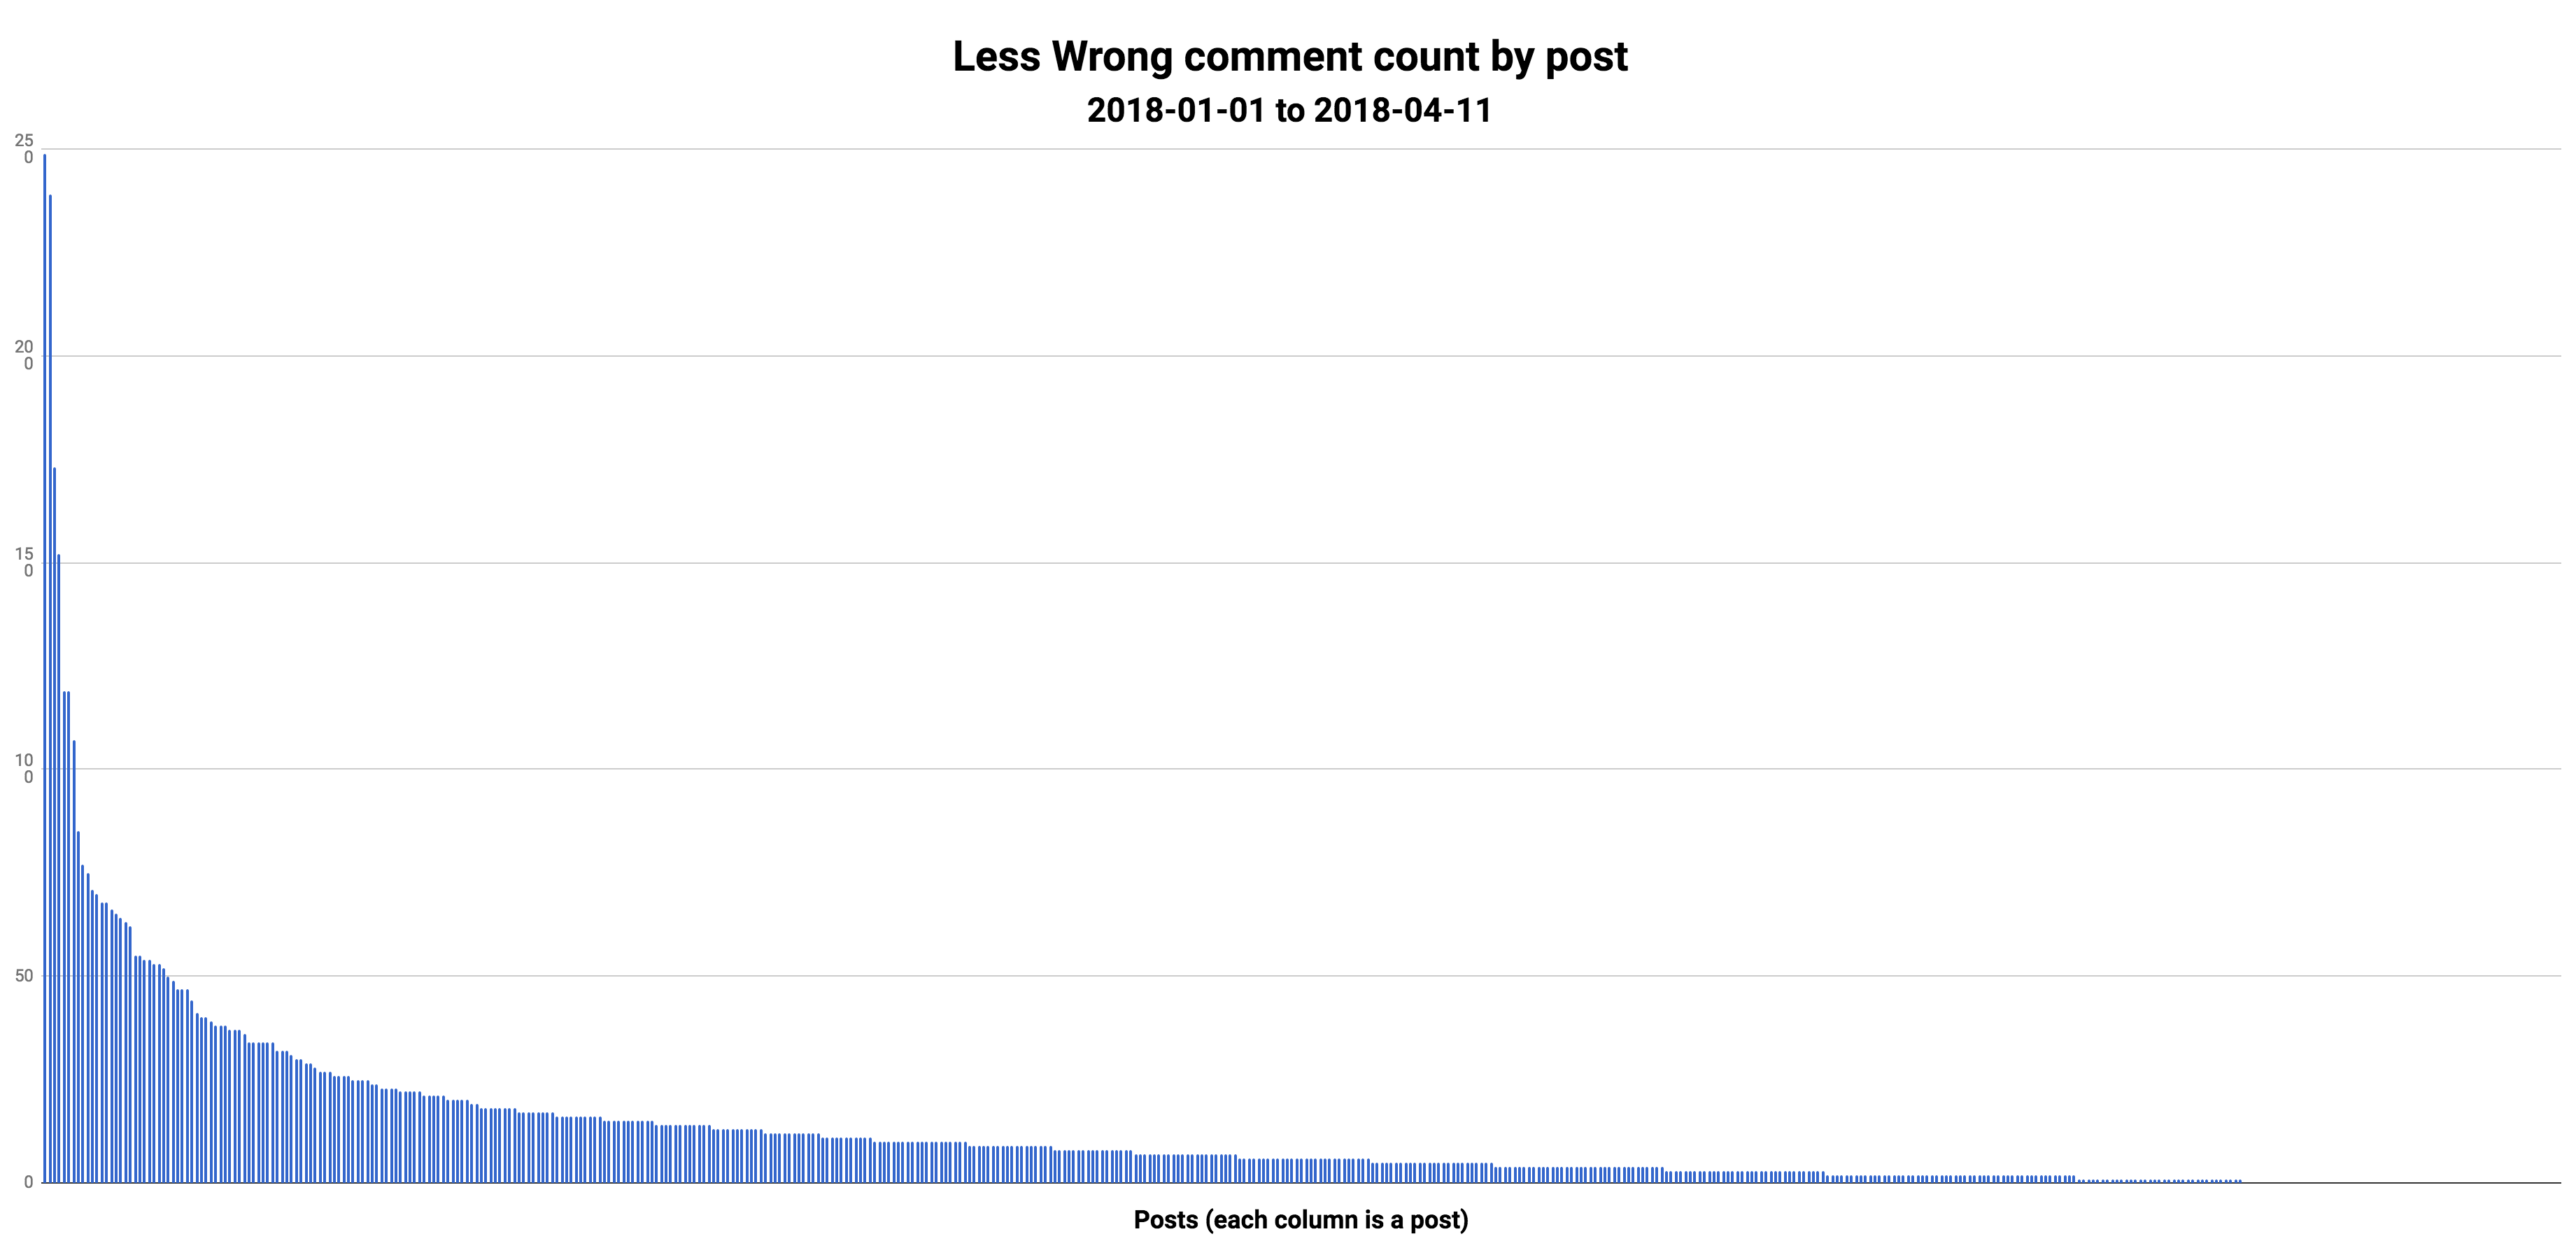 Less Wrong comment count by post